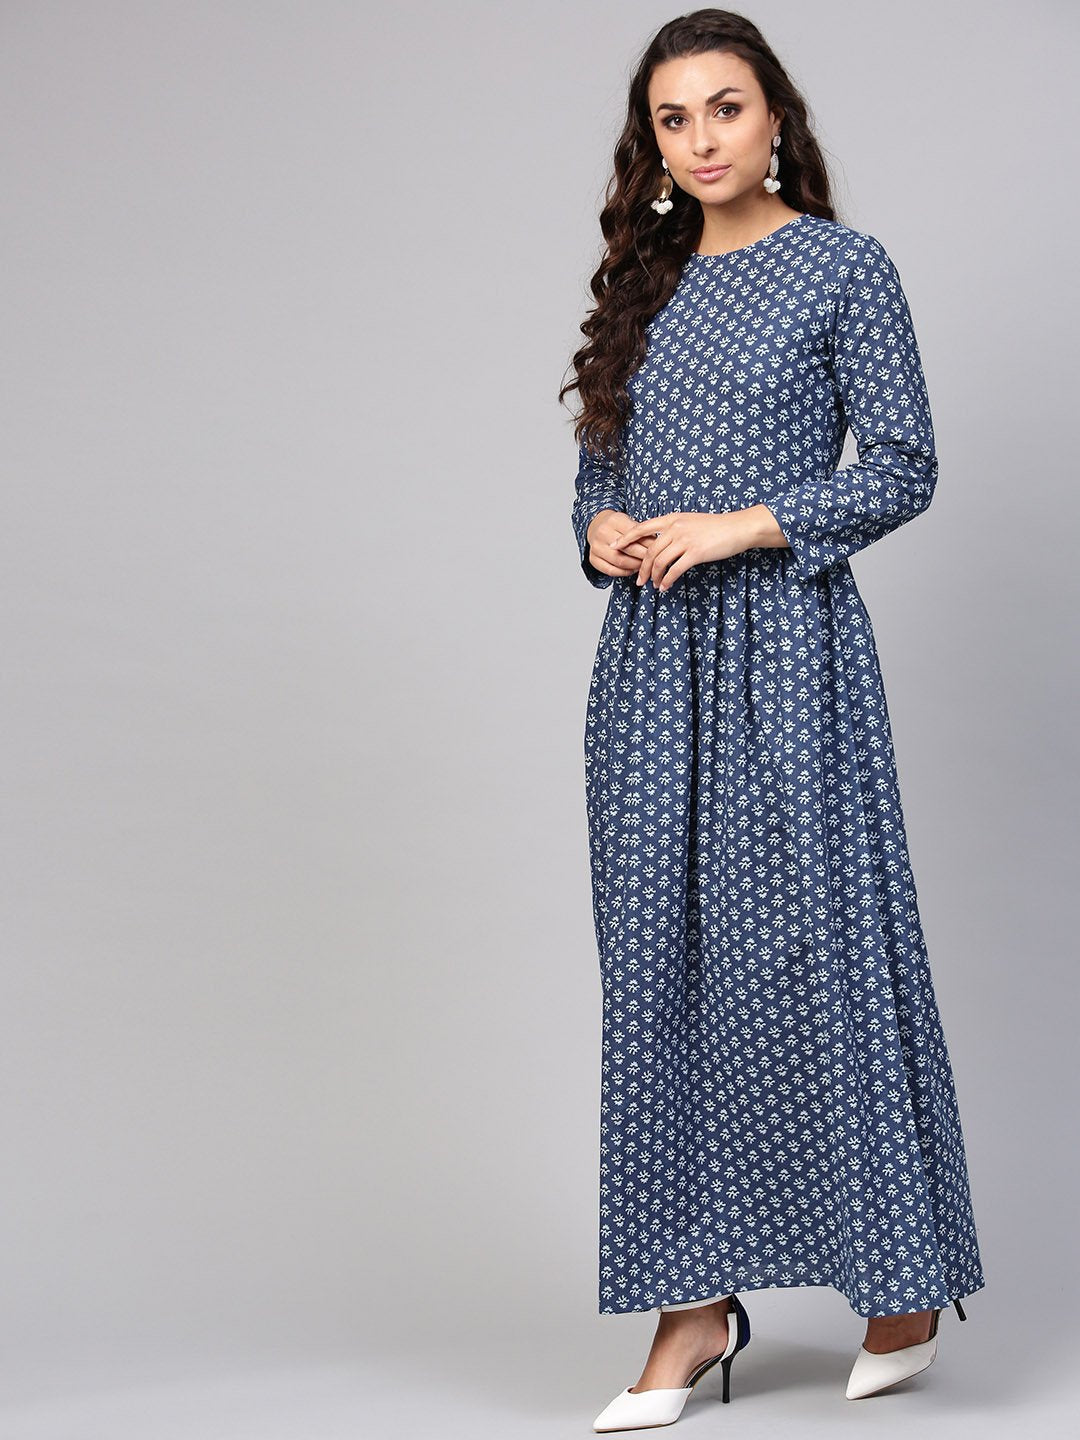 Women's Navy Blue Printed Maxi Dress With Round Neck & Full Sleeves - Nayo Clothing